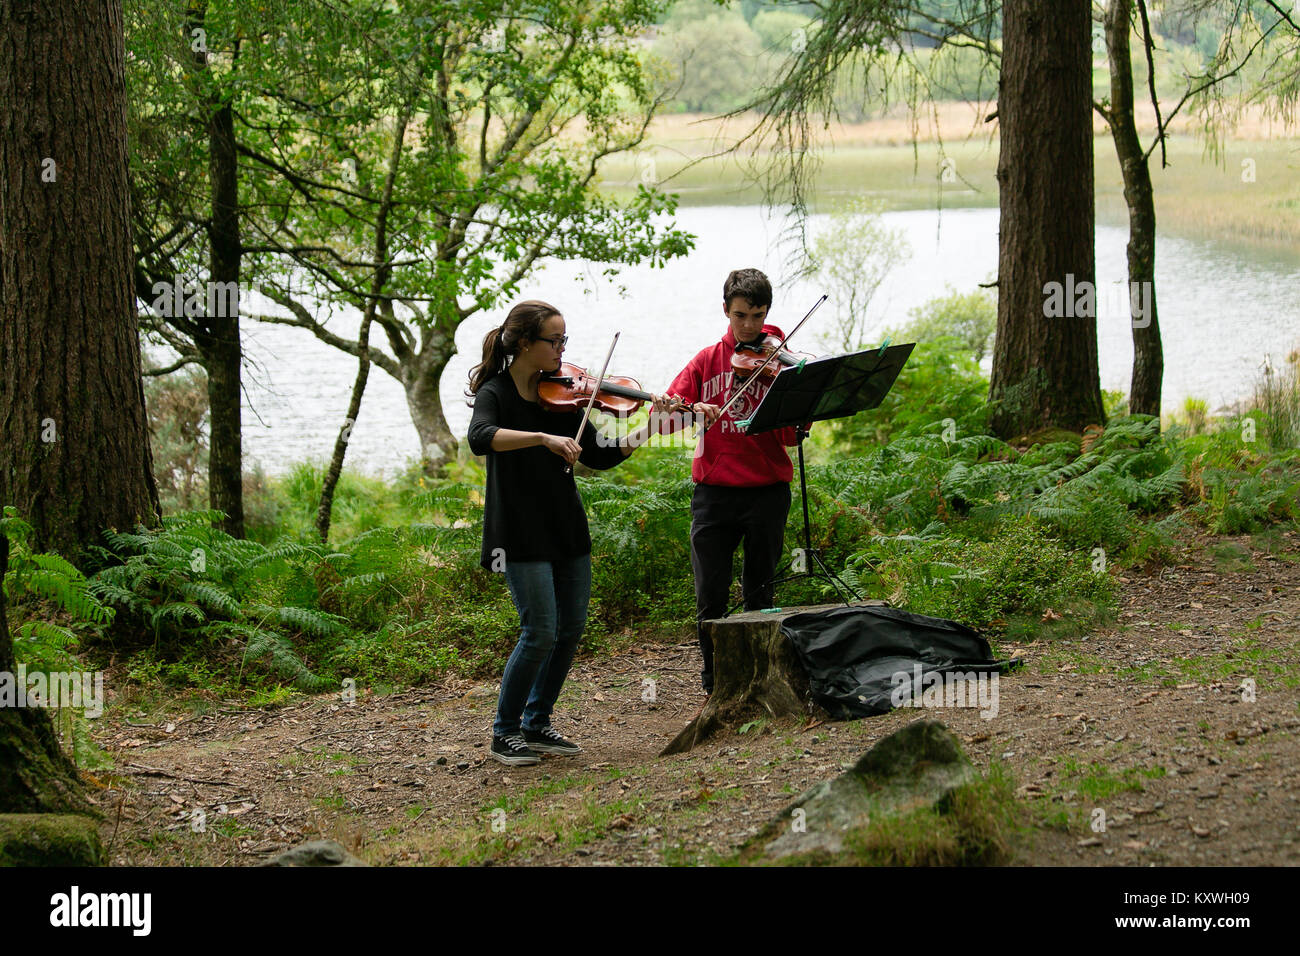 Two fiddlers playing on violins classical music on the side of the trail walk in Glendalough Valley, County Wicklow, Ireland Stock Photo